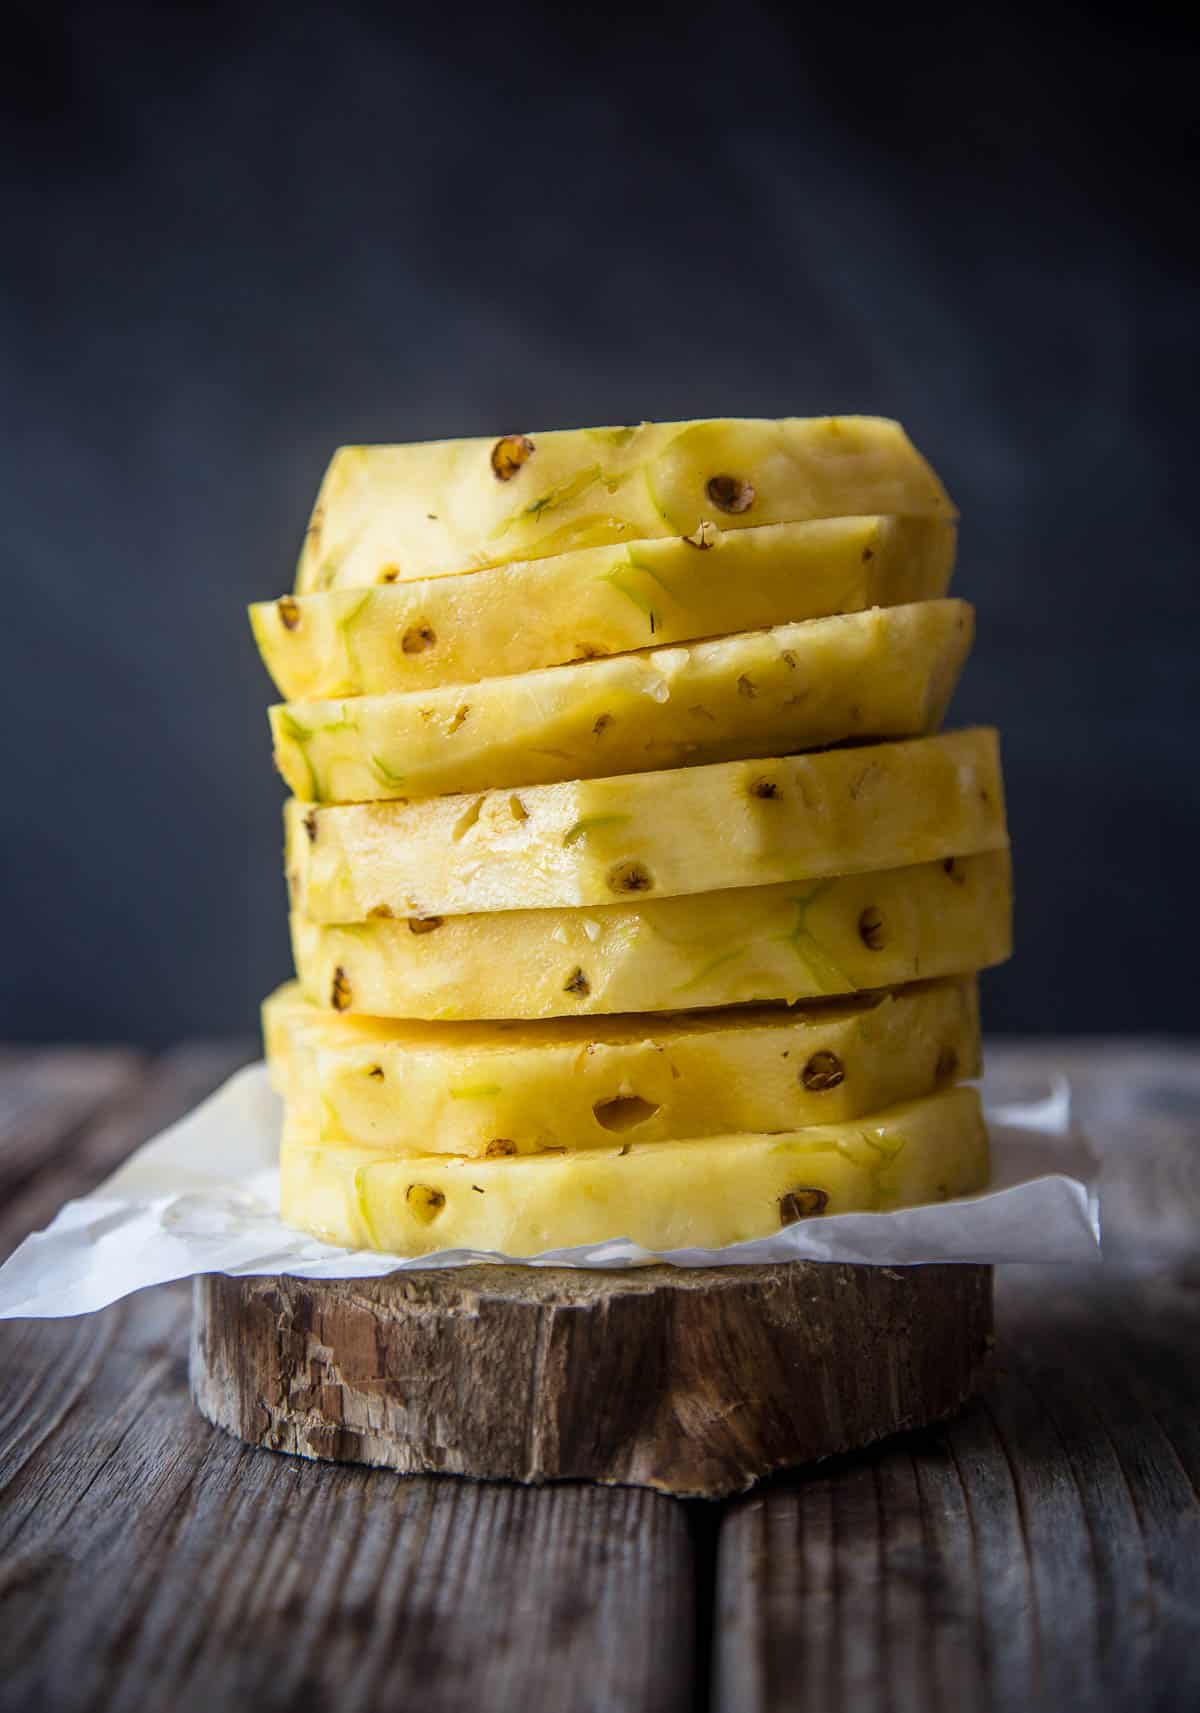 Pineapple slices stacked on top of each other